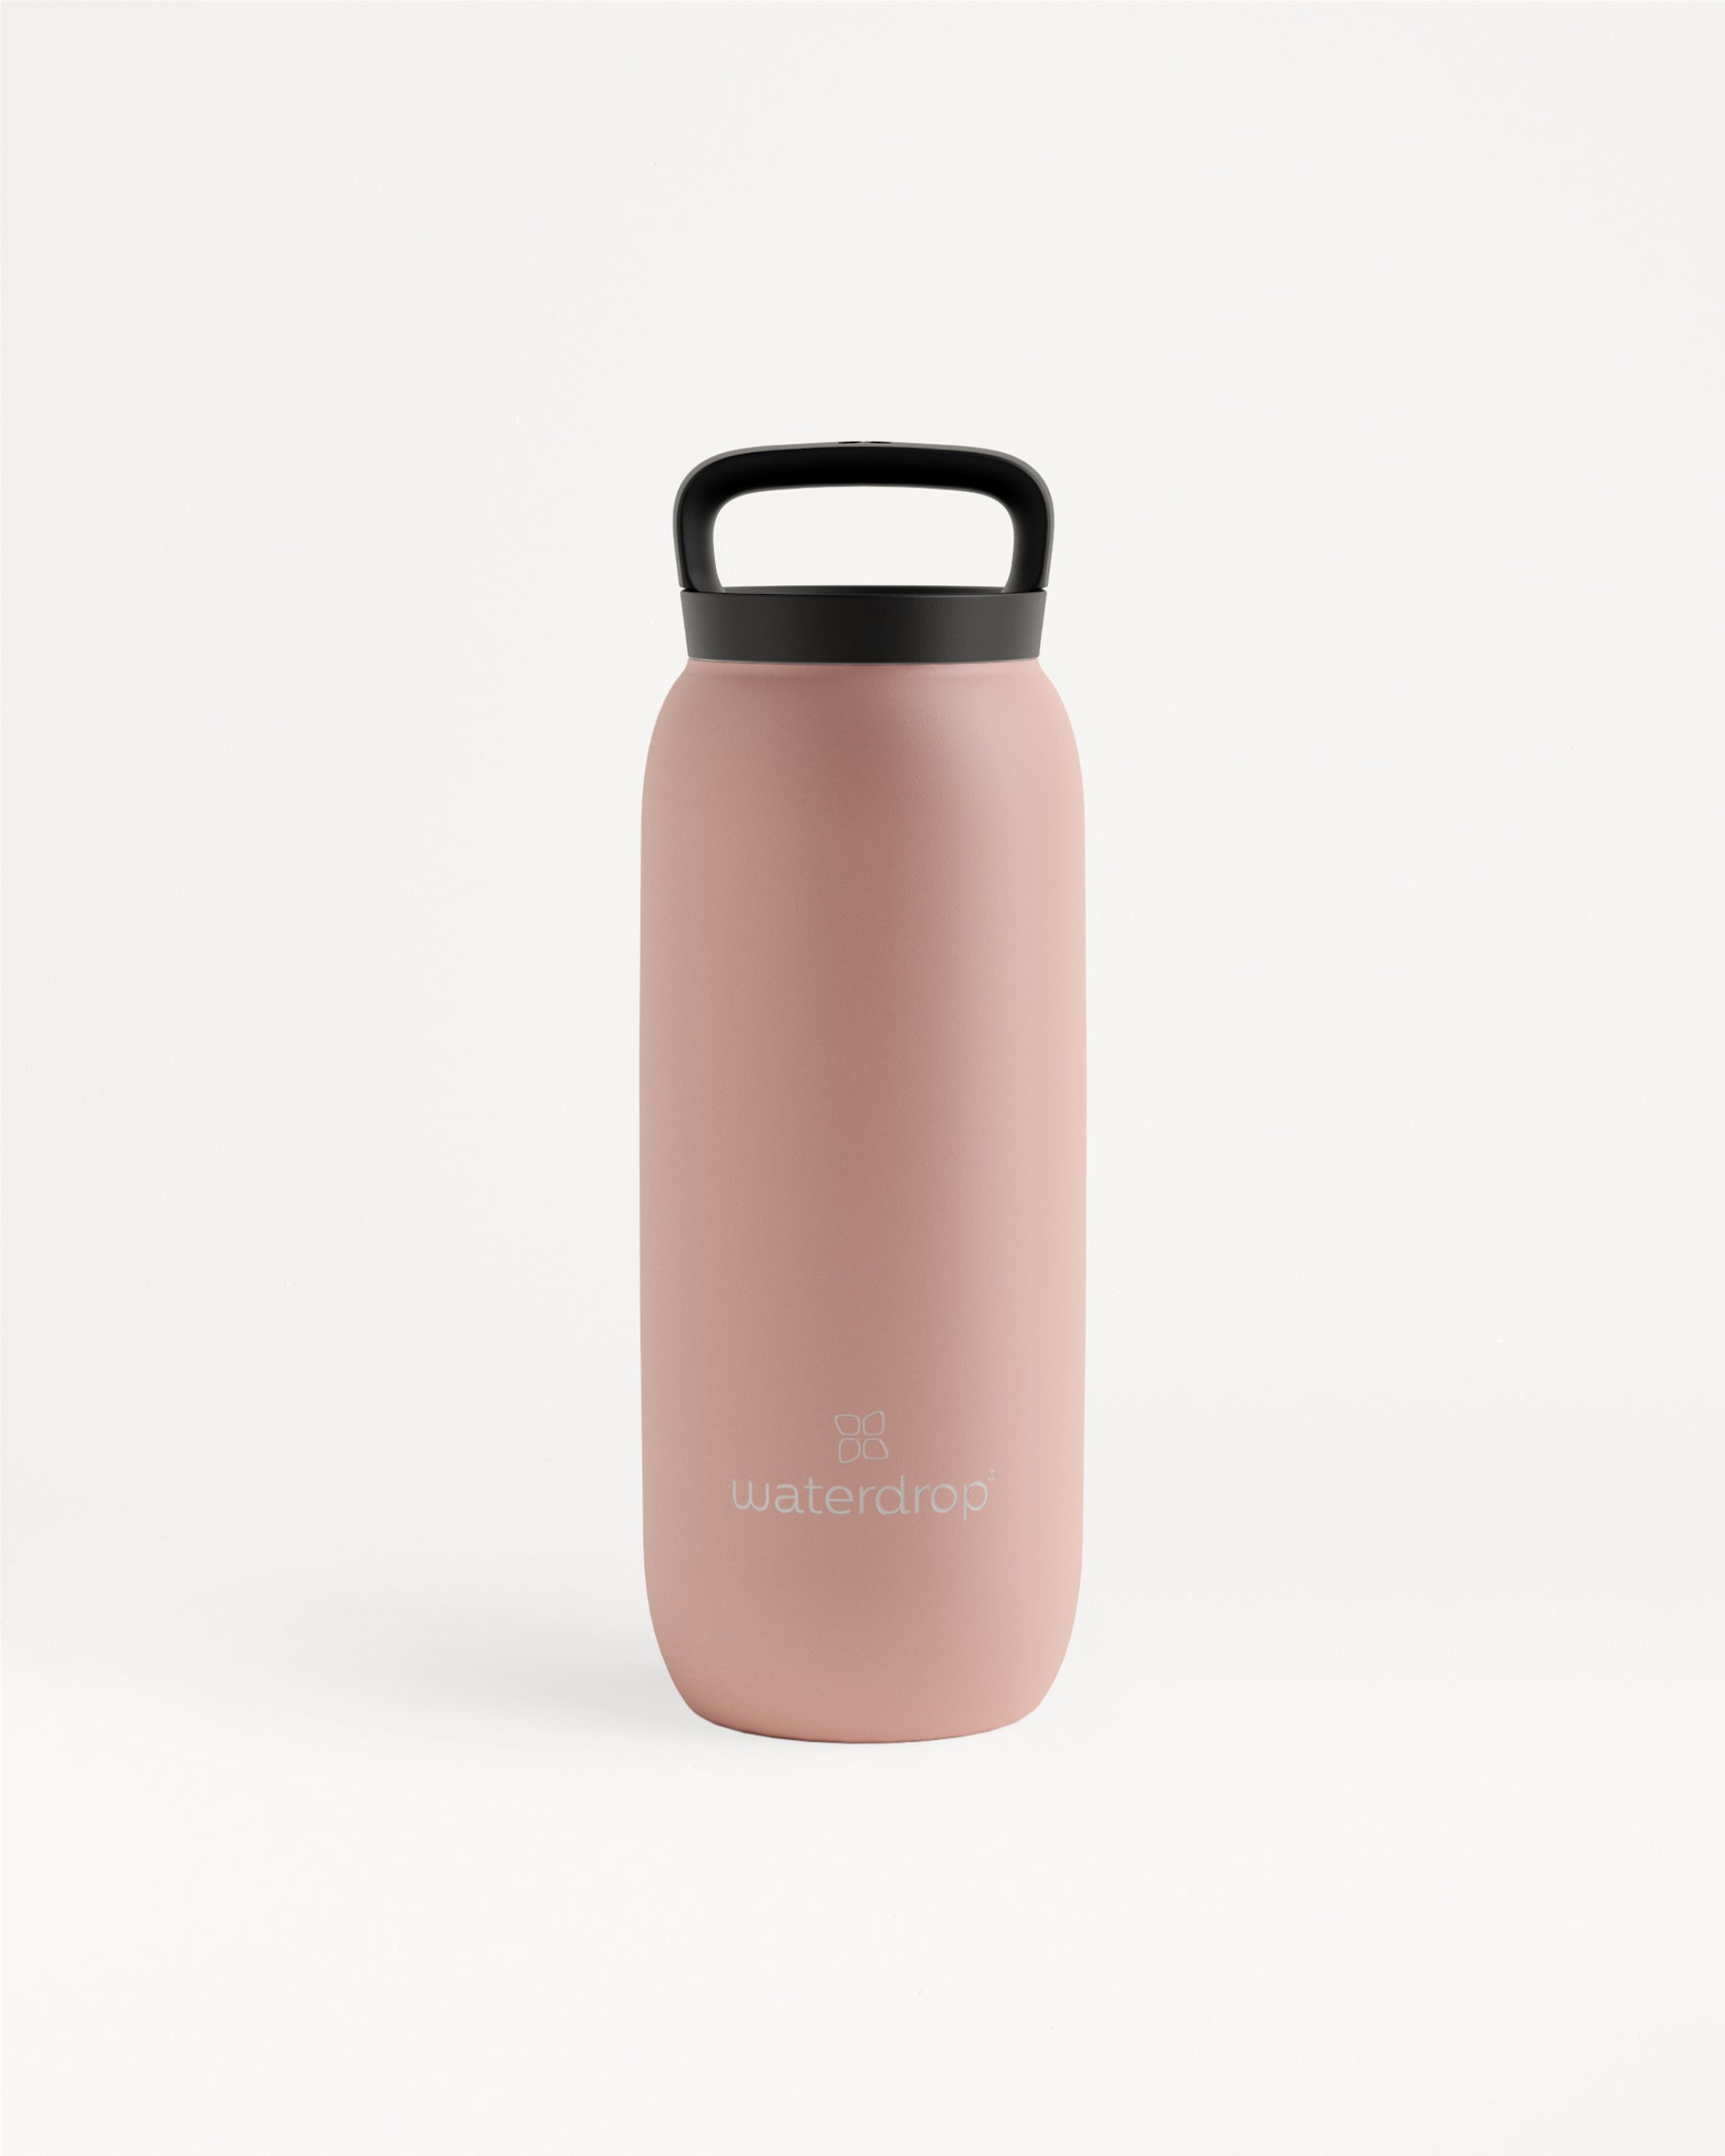 Hydro Flask Food Flask 17 oz Classic Stainless